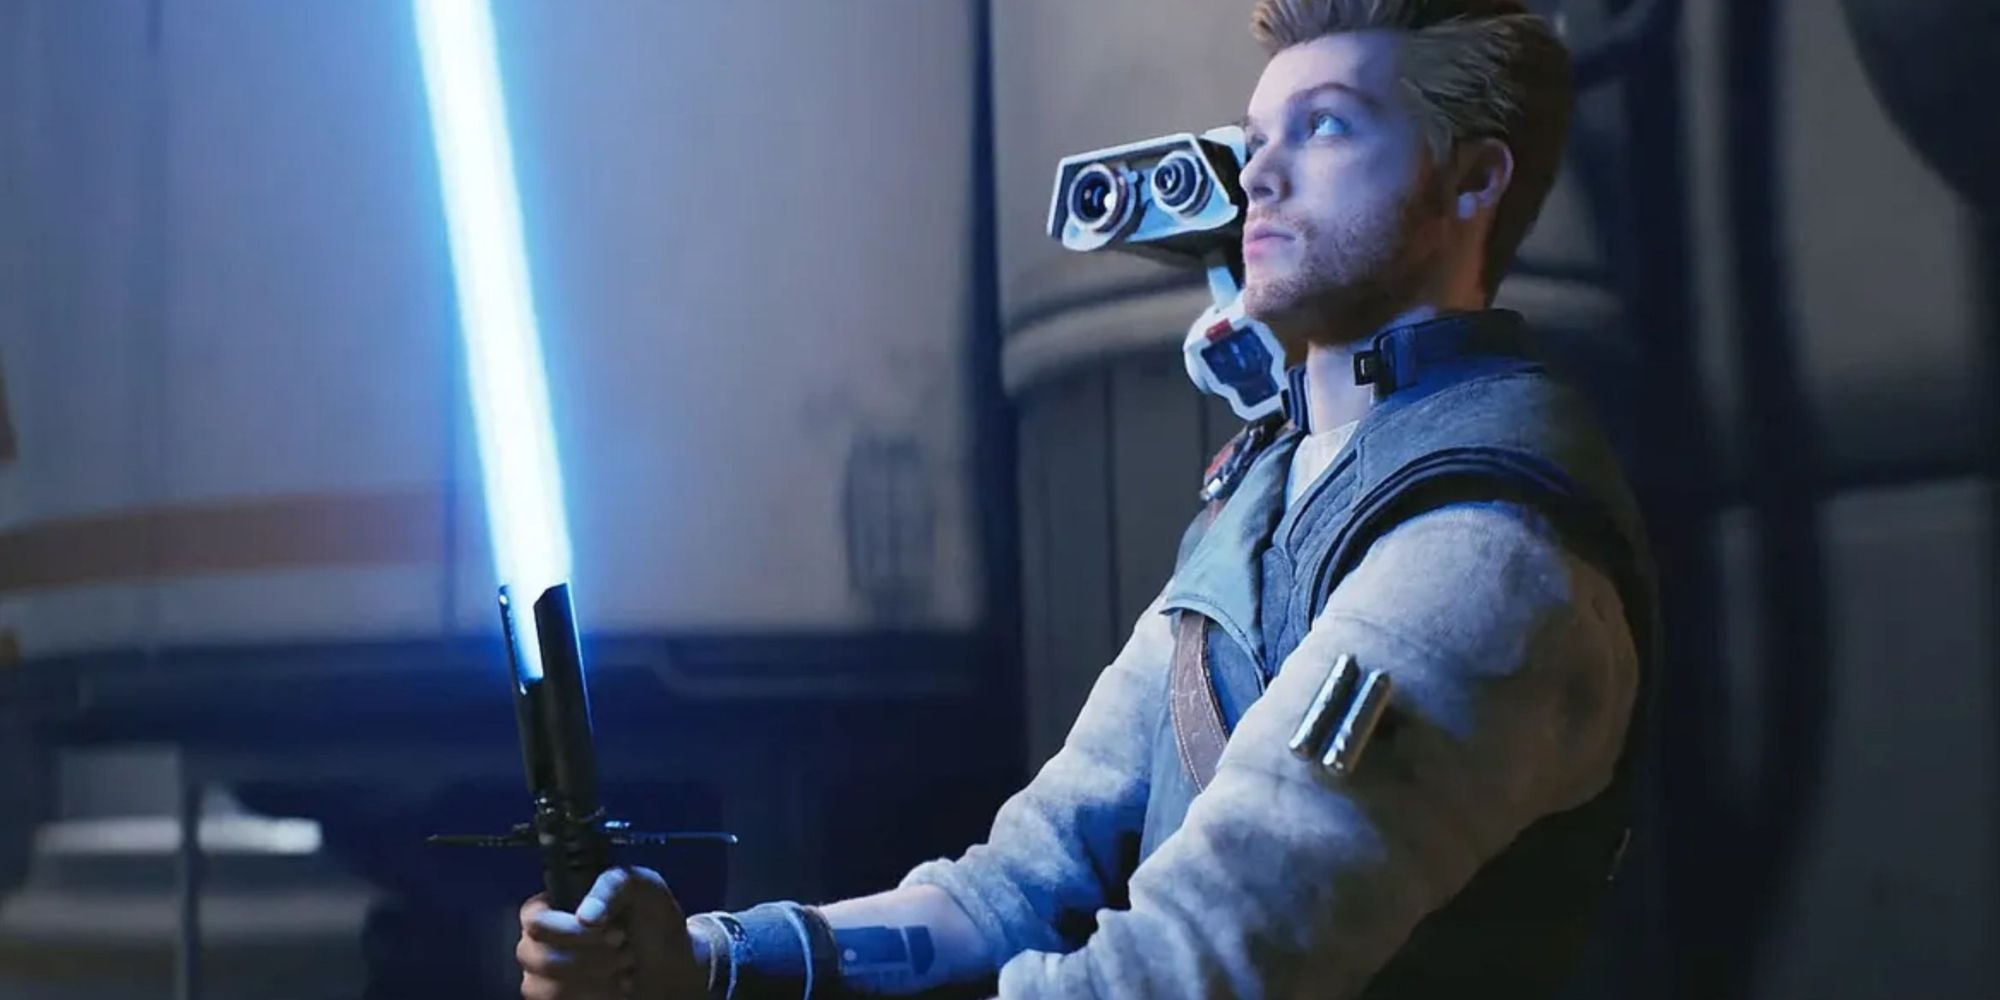 Star Was Jedi Survivor with Cal holding a lightsaberand BD-1 on his shoulder looking at the blue glow.